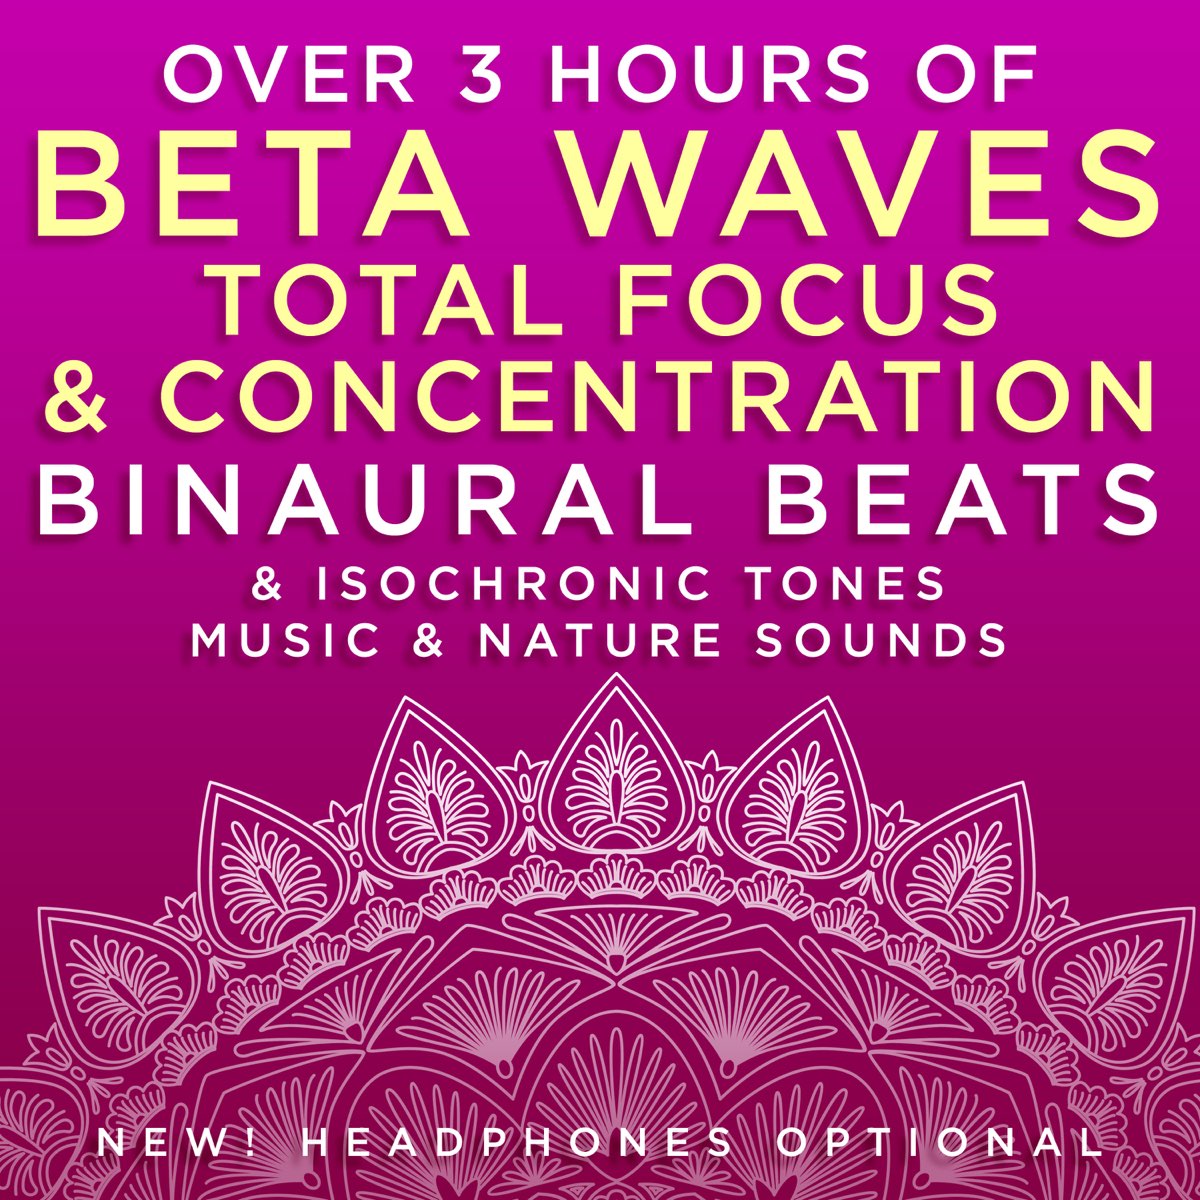 Over 3 Hours of Beta Waves Total Focus & Concentration Binaural Beats & Isochronic  Tones Music & Nature Sounds by Binaural Beats Research & David & Steve  Gordon on Apple Music